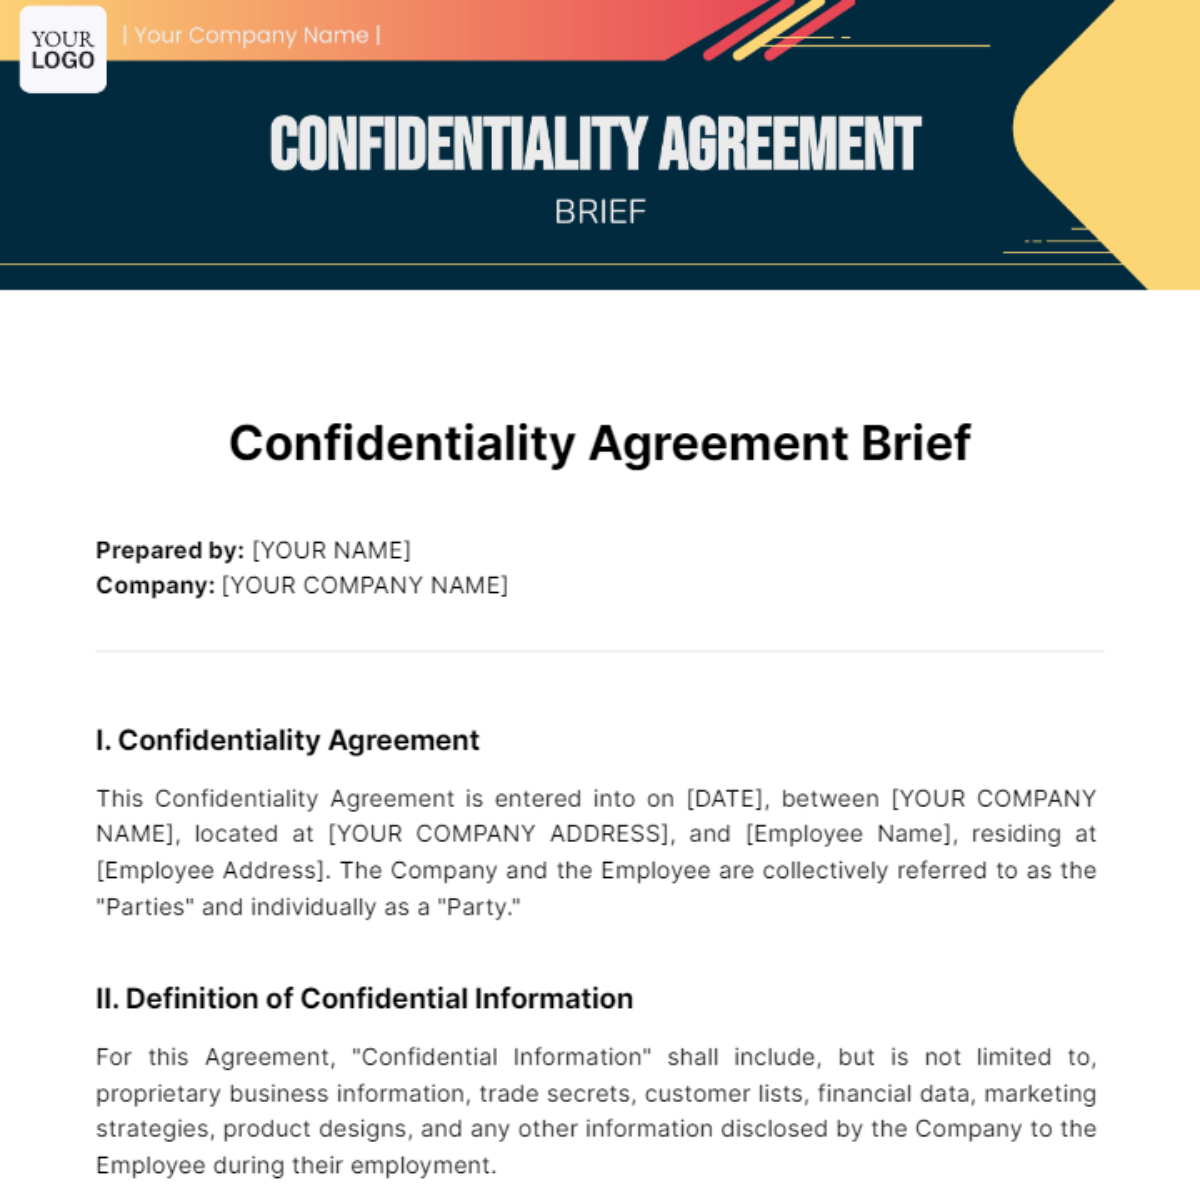 Confidentiality Agreement Brief Template